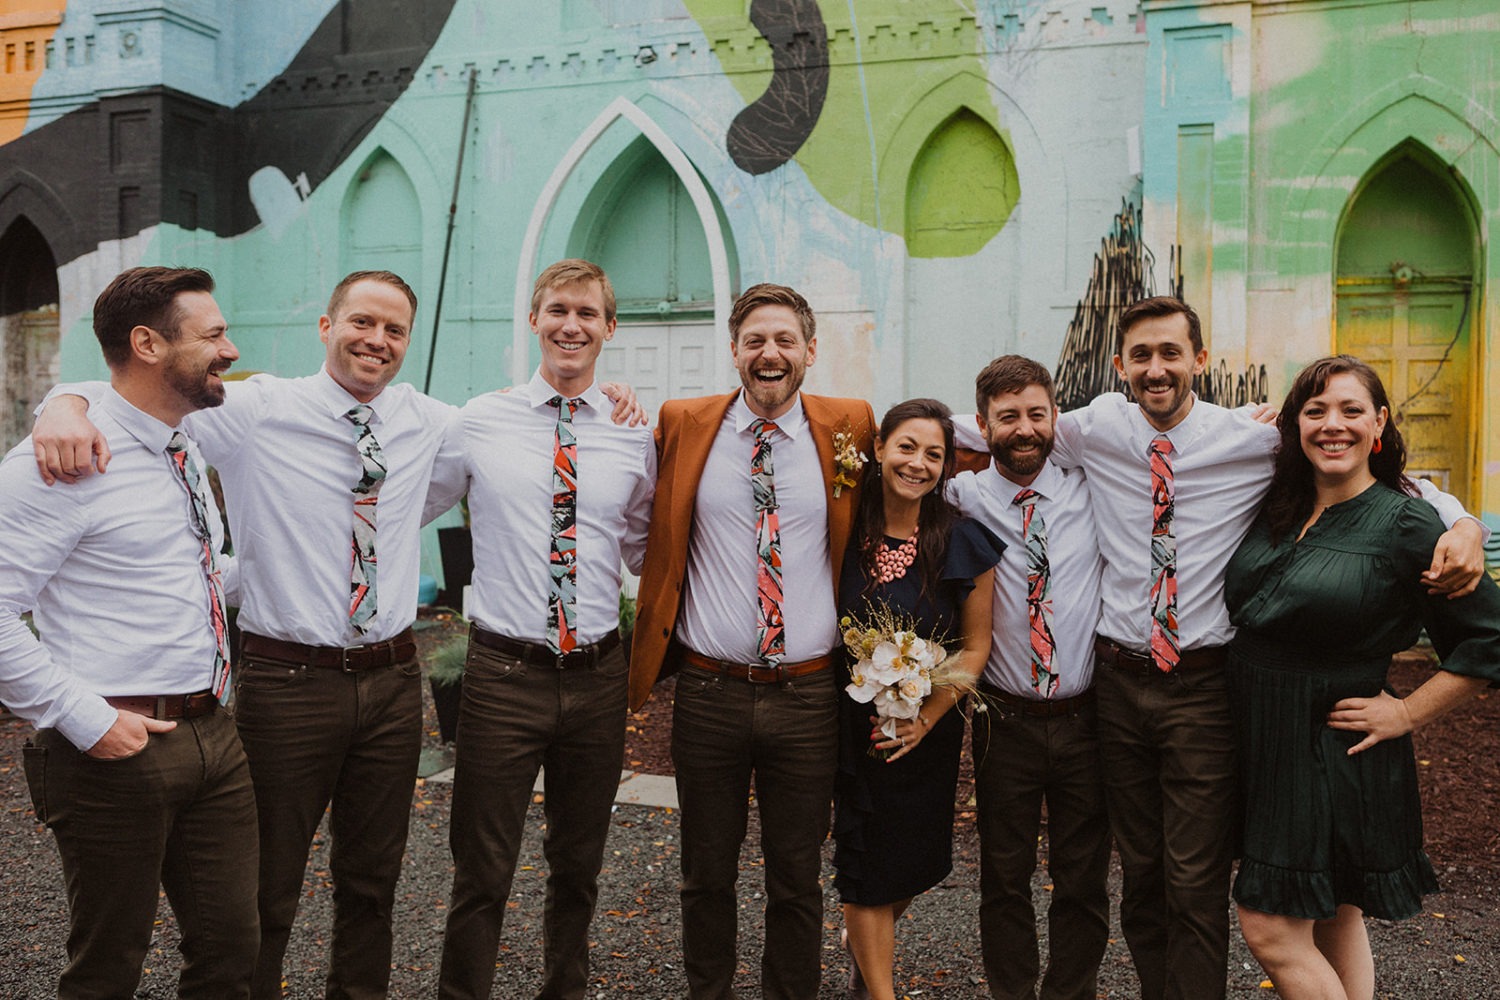 groom stands with wedding party wearing matching ties